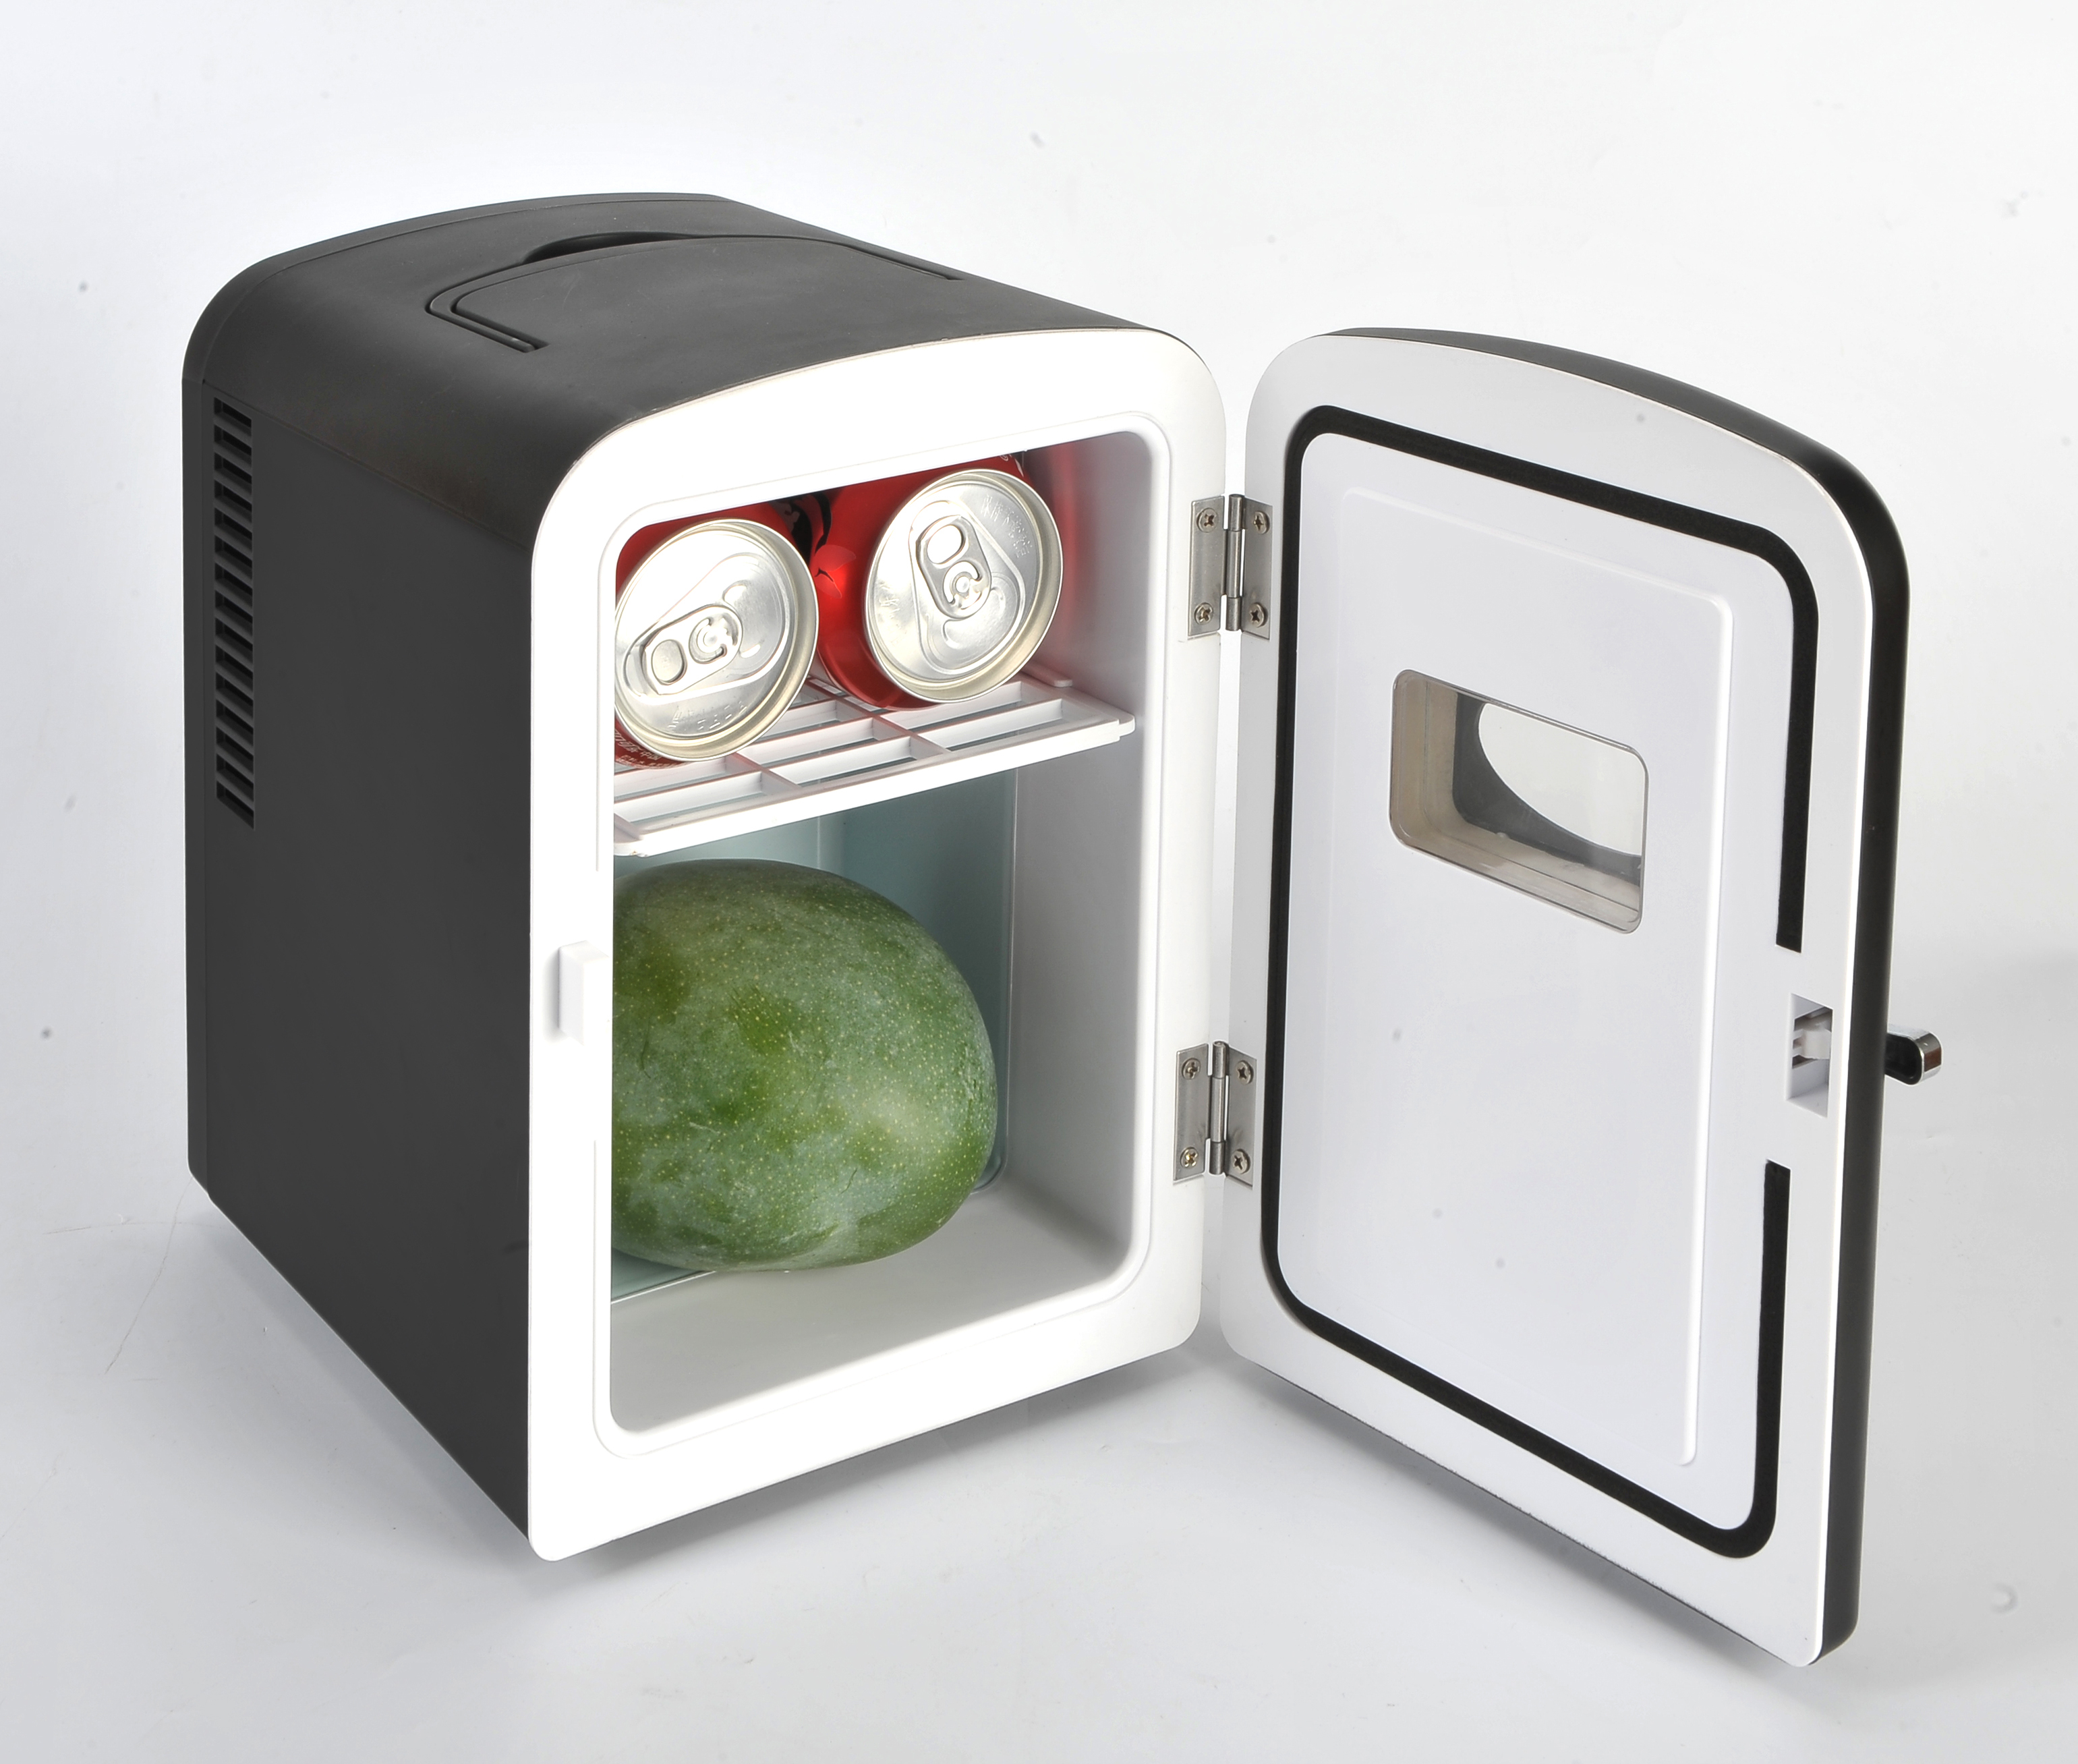 Mini Fridge Hot and Cold both function